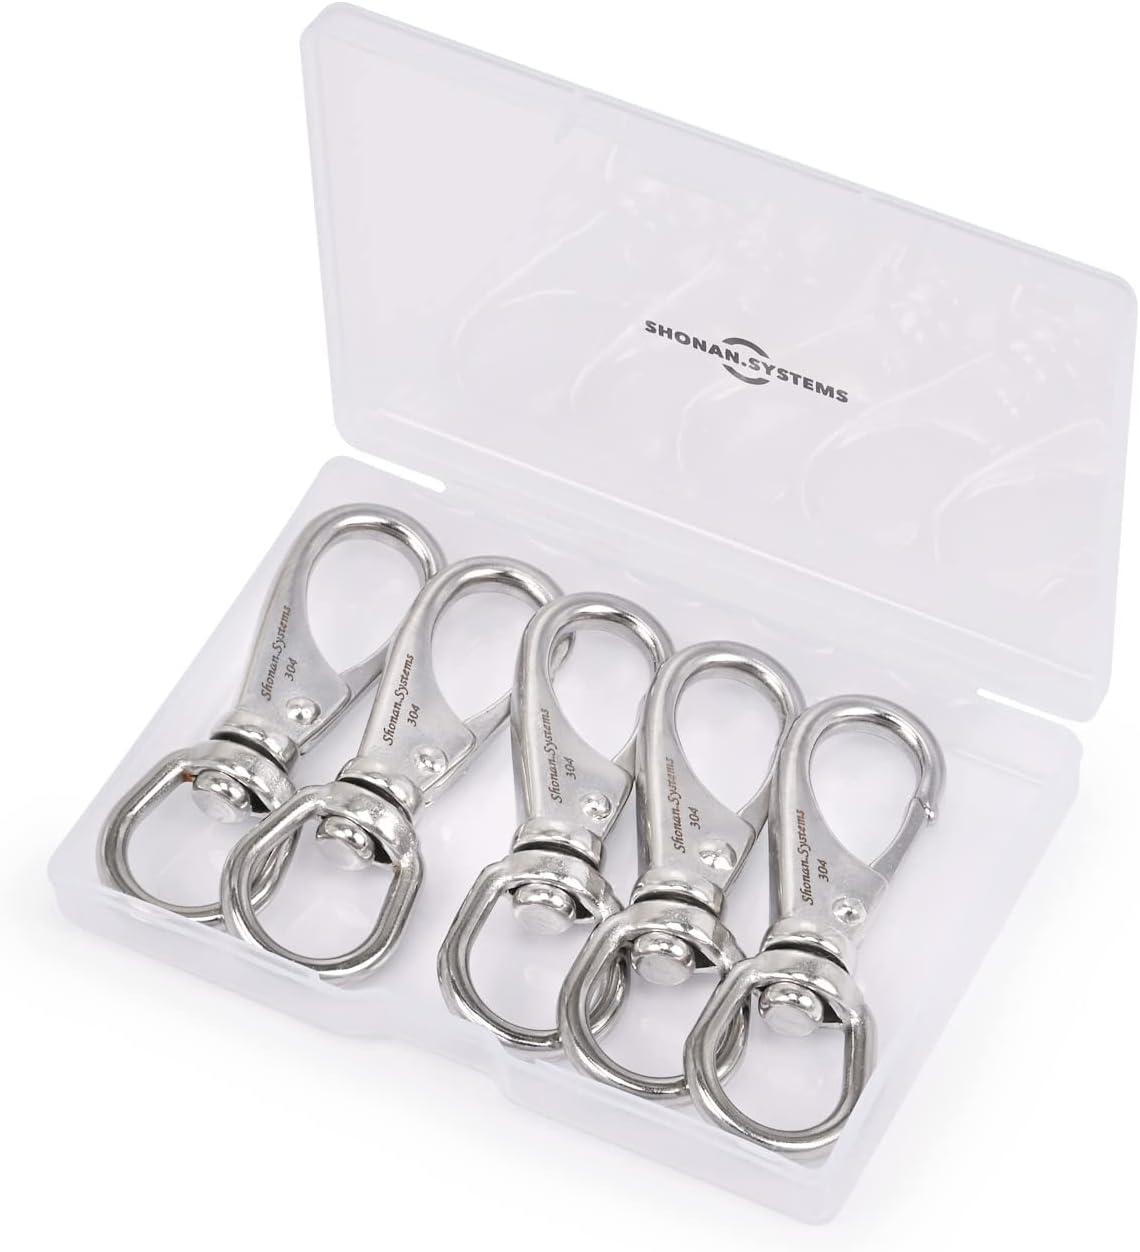 AOKLIT 4 Pack Stainless Steel Swivel Eye Snap Hook M6(2#) Marine Boat  Hardware Spring Buckle for Bird Feeders, Pet Chains, Dog Tie-Out Cable,  Keychains and More (4 x 1-1/2 inch) : 